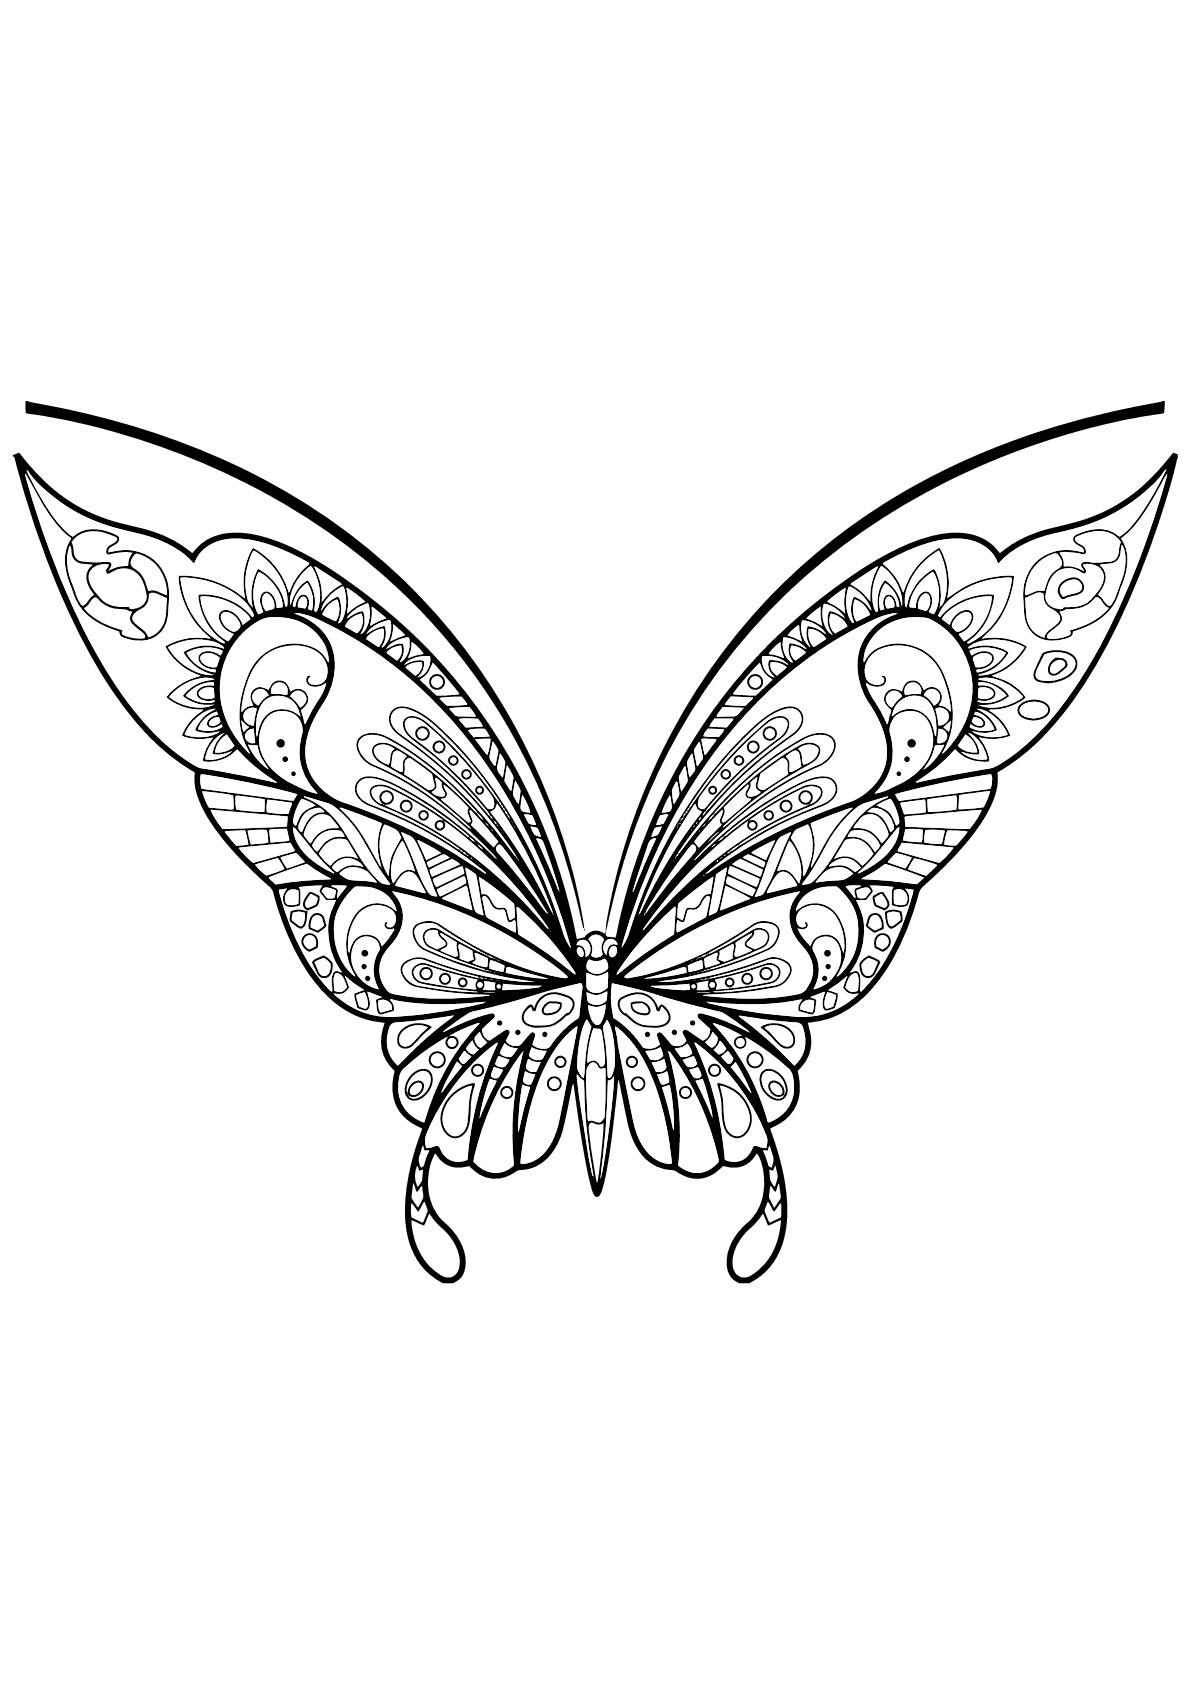 Download Butterfly beautiful patterns 7 - Butterflies & insects Adult Coloring Pages